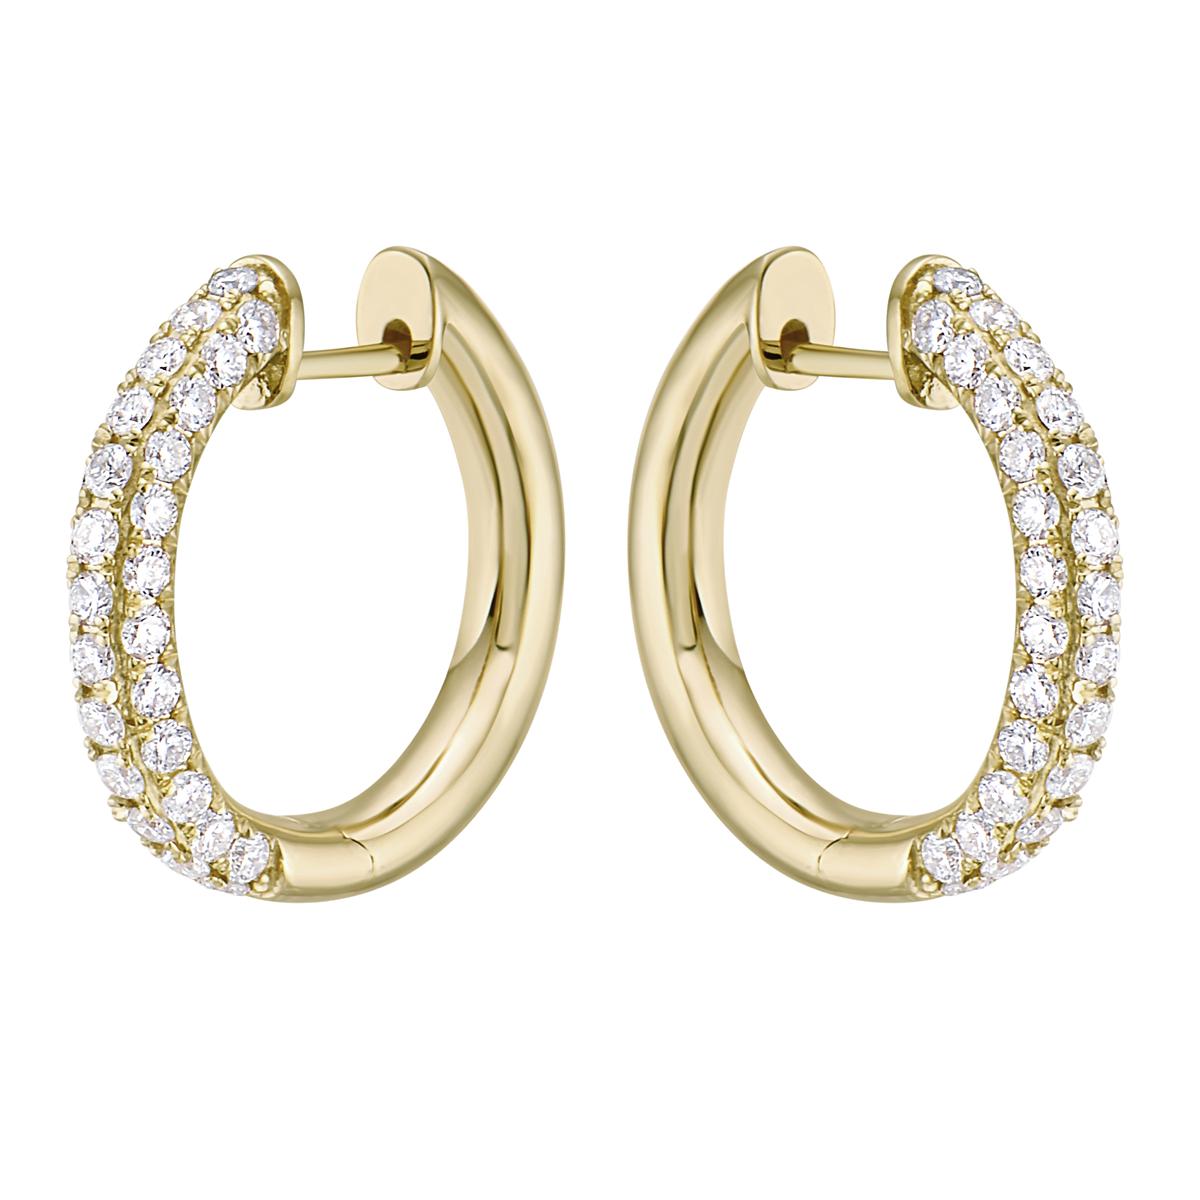 With these exquisite yellow gold huggies hoop diamond earrings, style and glamour are in the spotlight. These yellow gold hoop earrings are set in 14-karat gold and made from 5.0 grams of gold. The color of the diamonds is GH. The clarity is SI1.